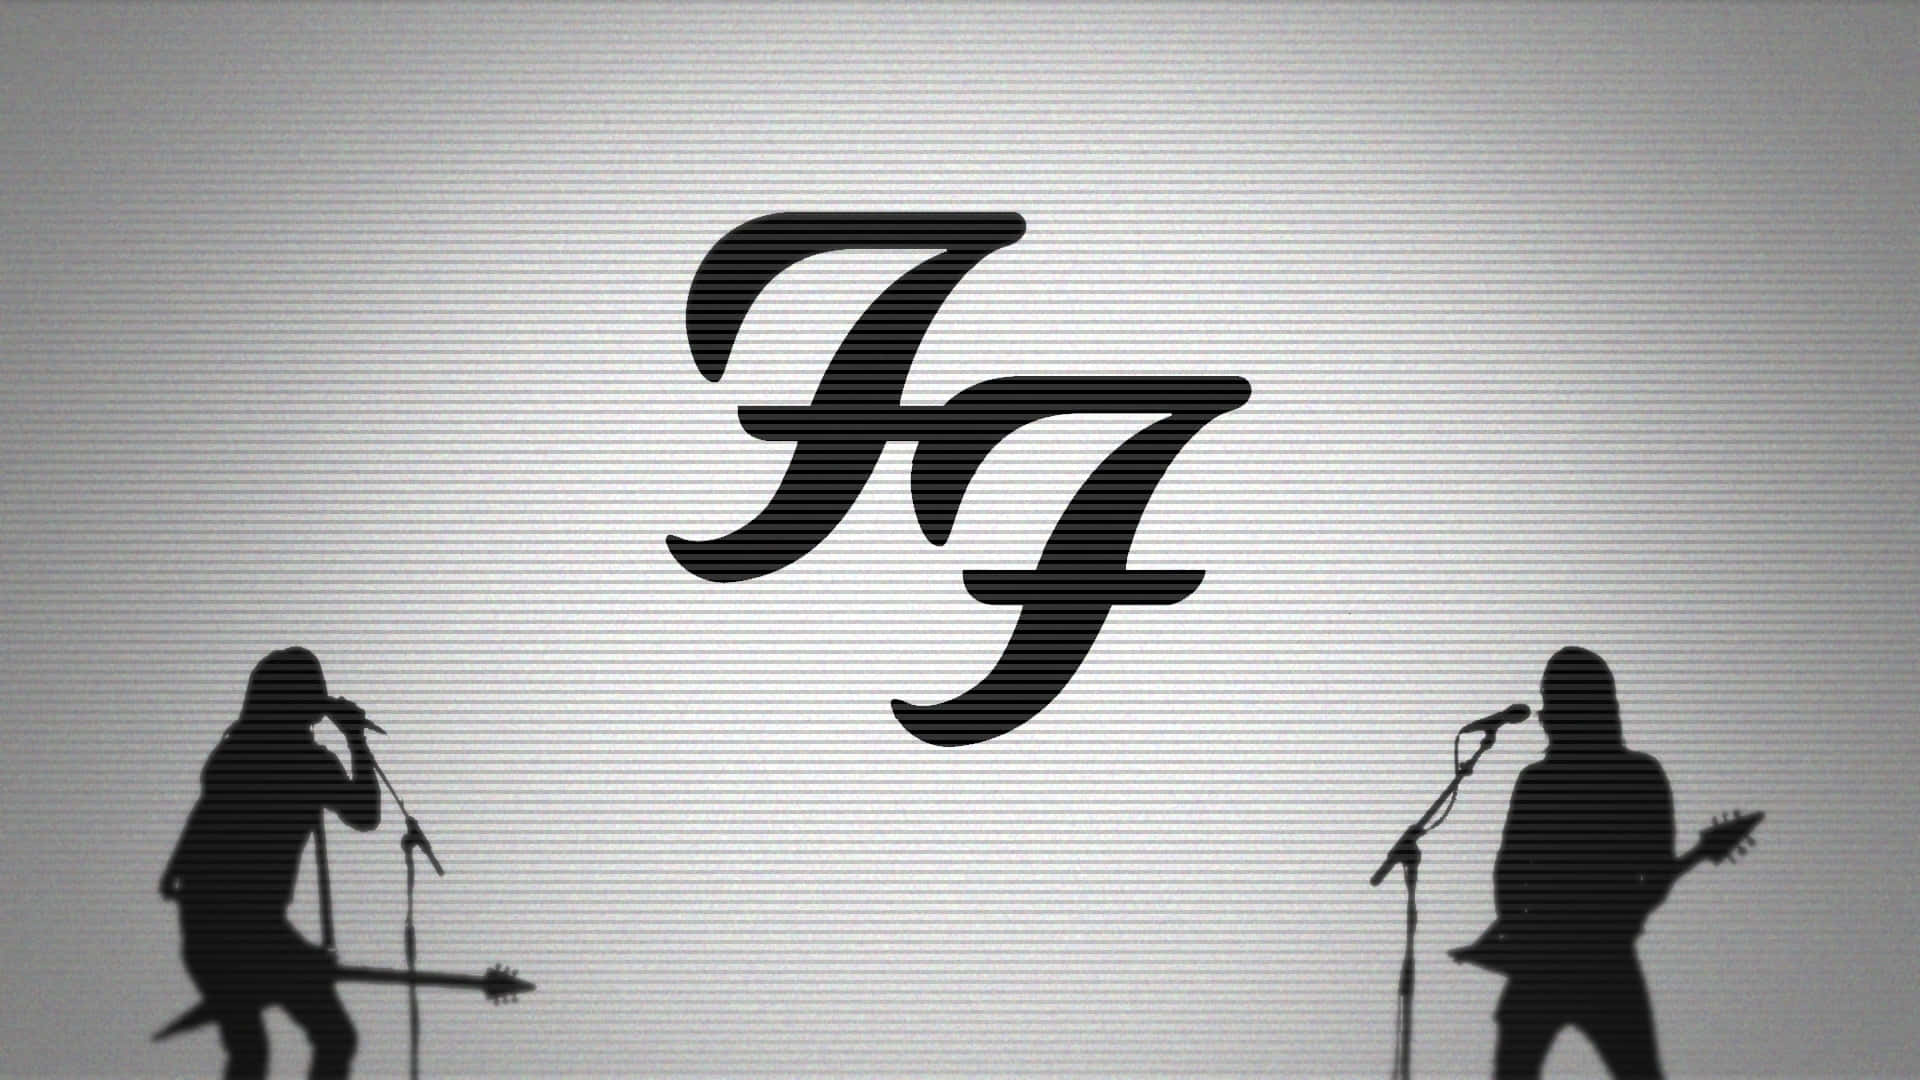 Foo Fighters Band Silhouette Logo Wallpaper